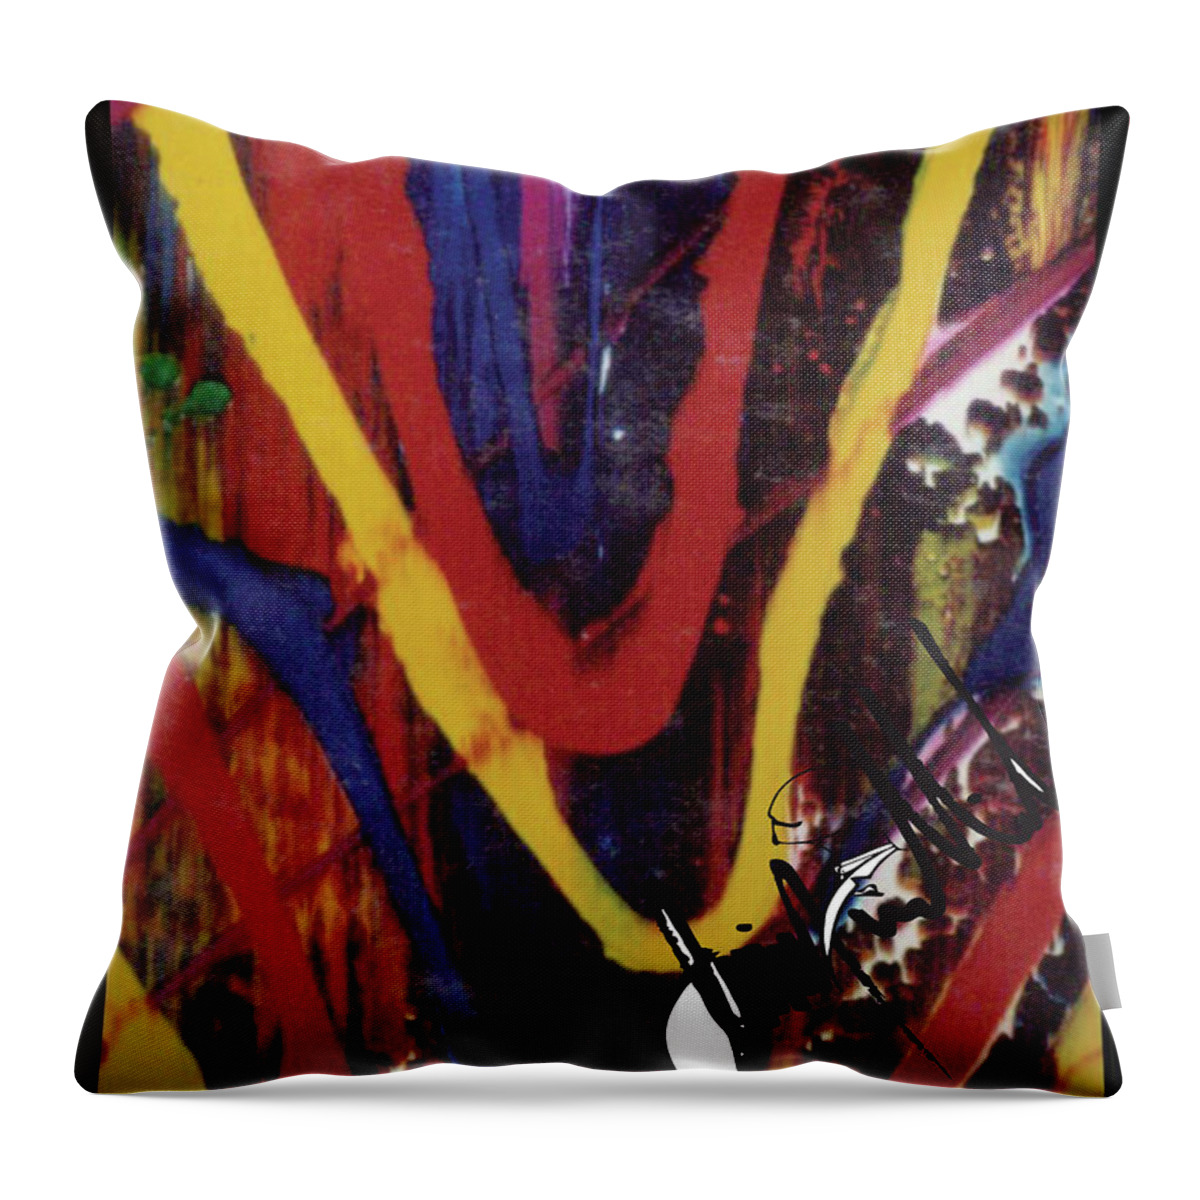  Throw Pillow featuring the digital art V by Jimmy Williams